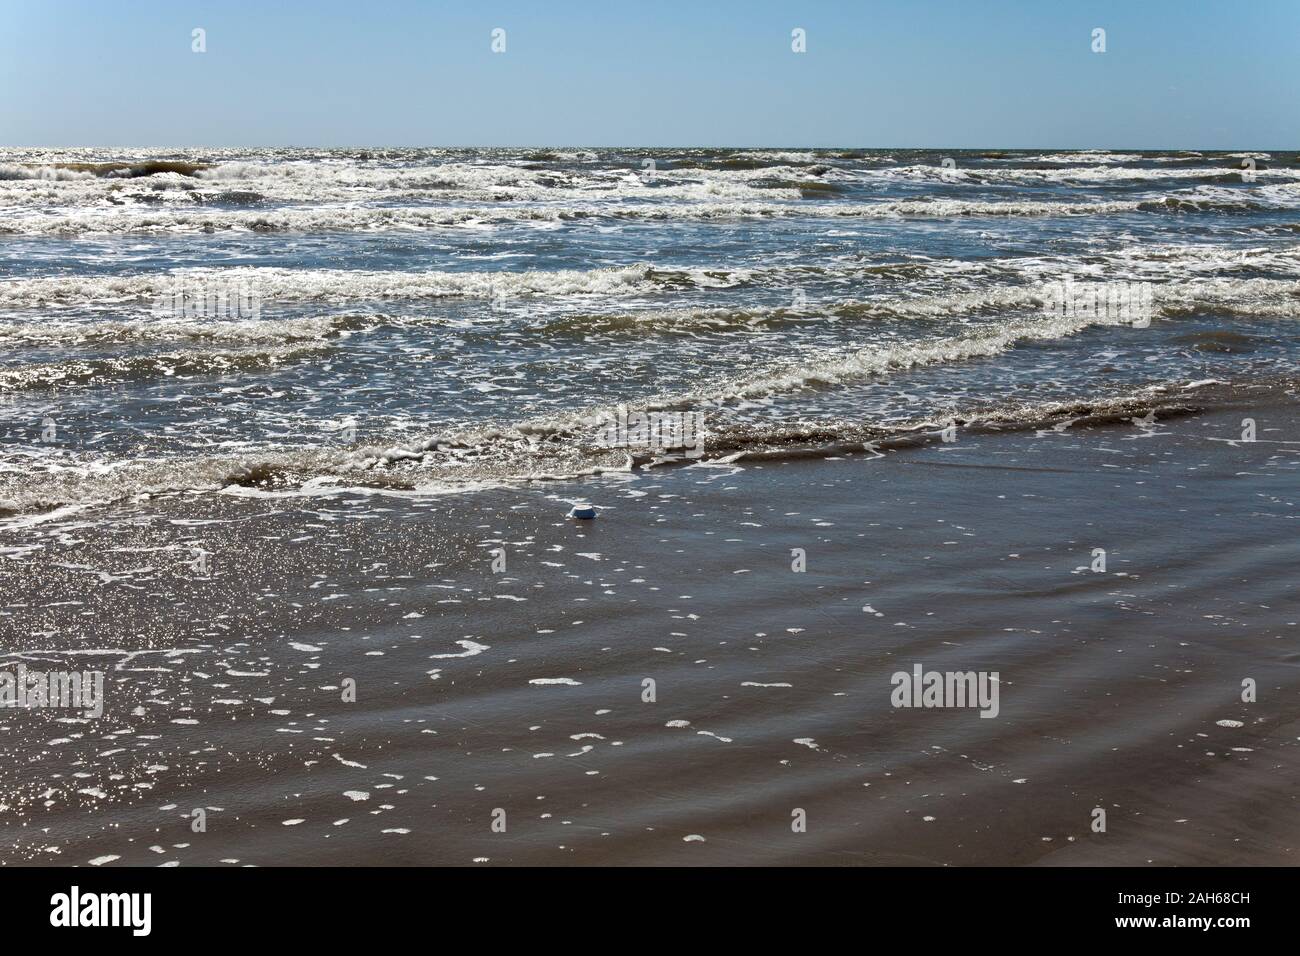 Seemingly endless waves roll on to Galveston's West Beach on the Gulf of Mexico, Texas coast. Stock Photo